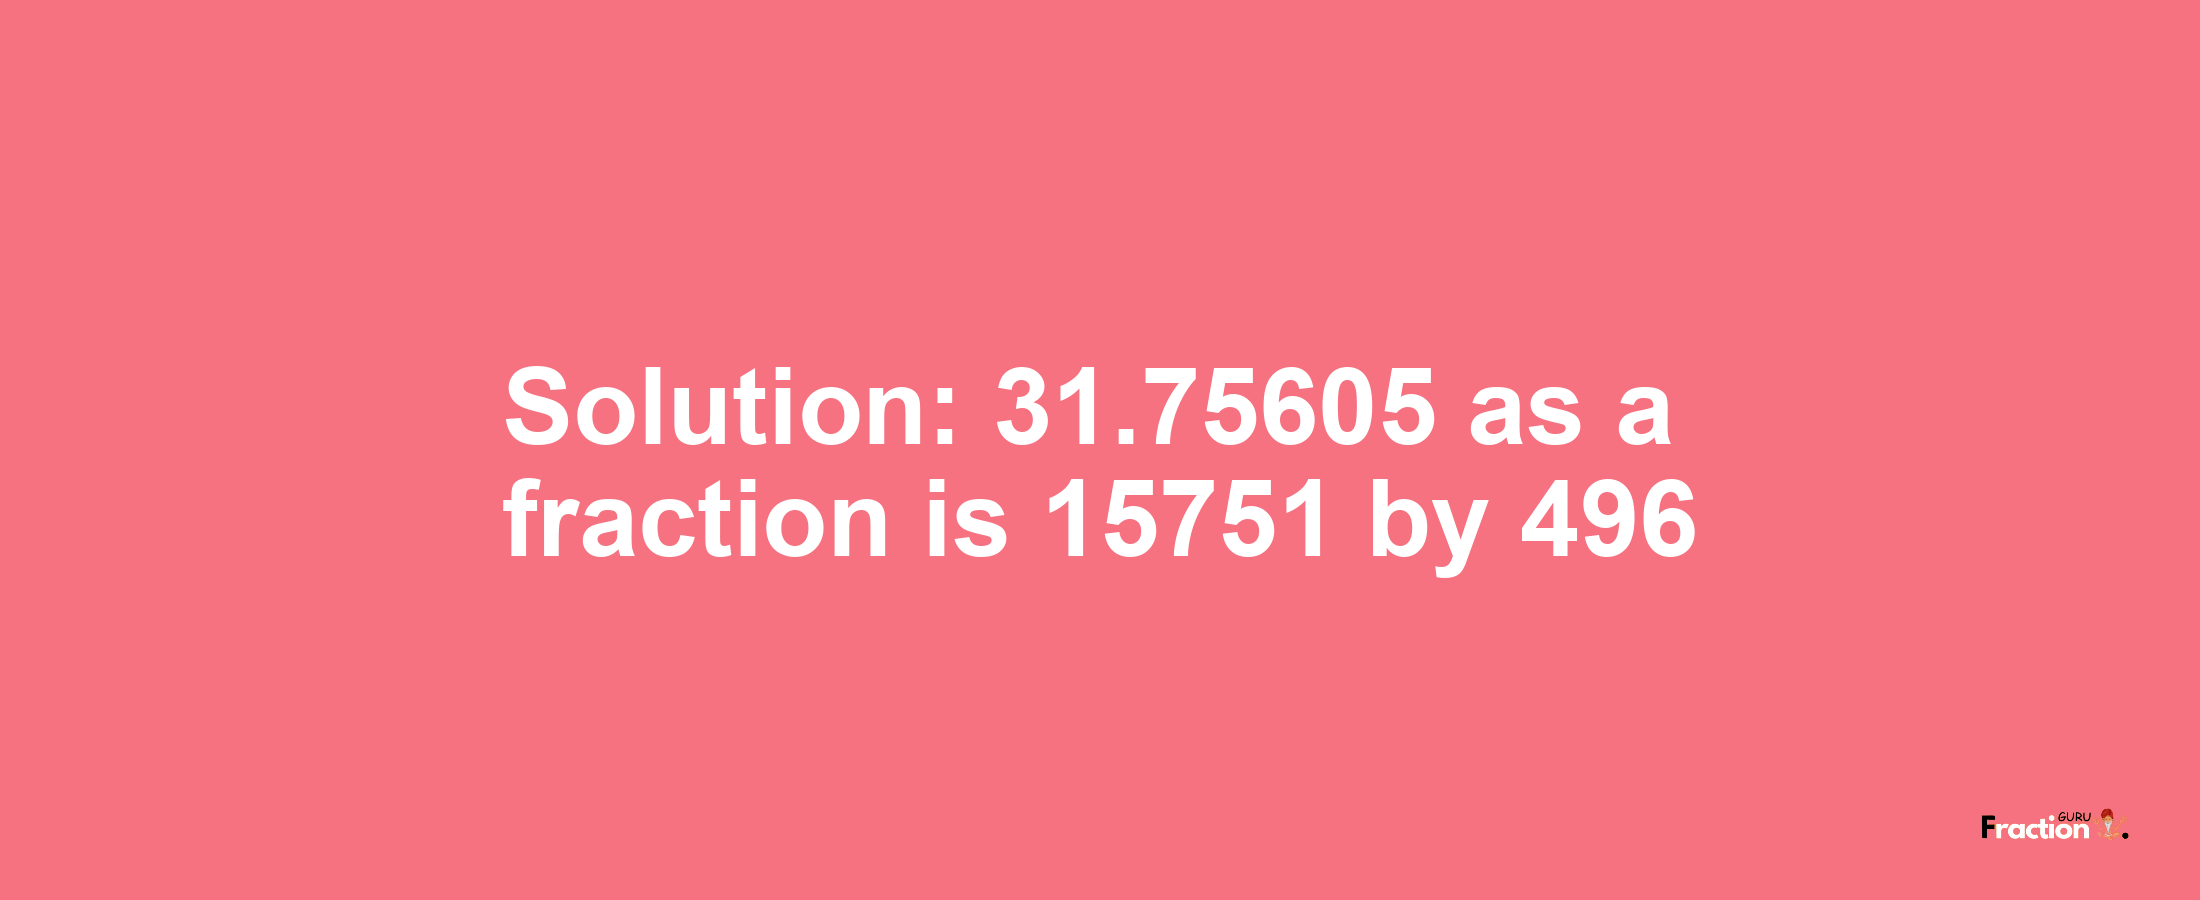 Solution:31.75605 as a fraction is 15751/496